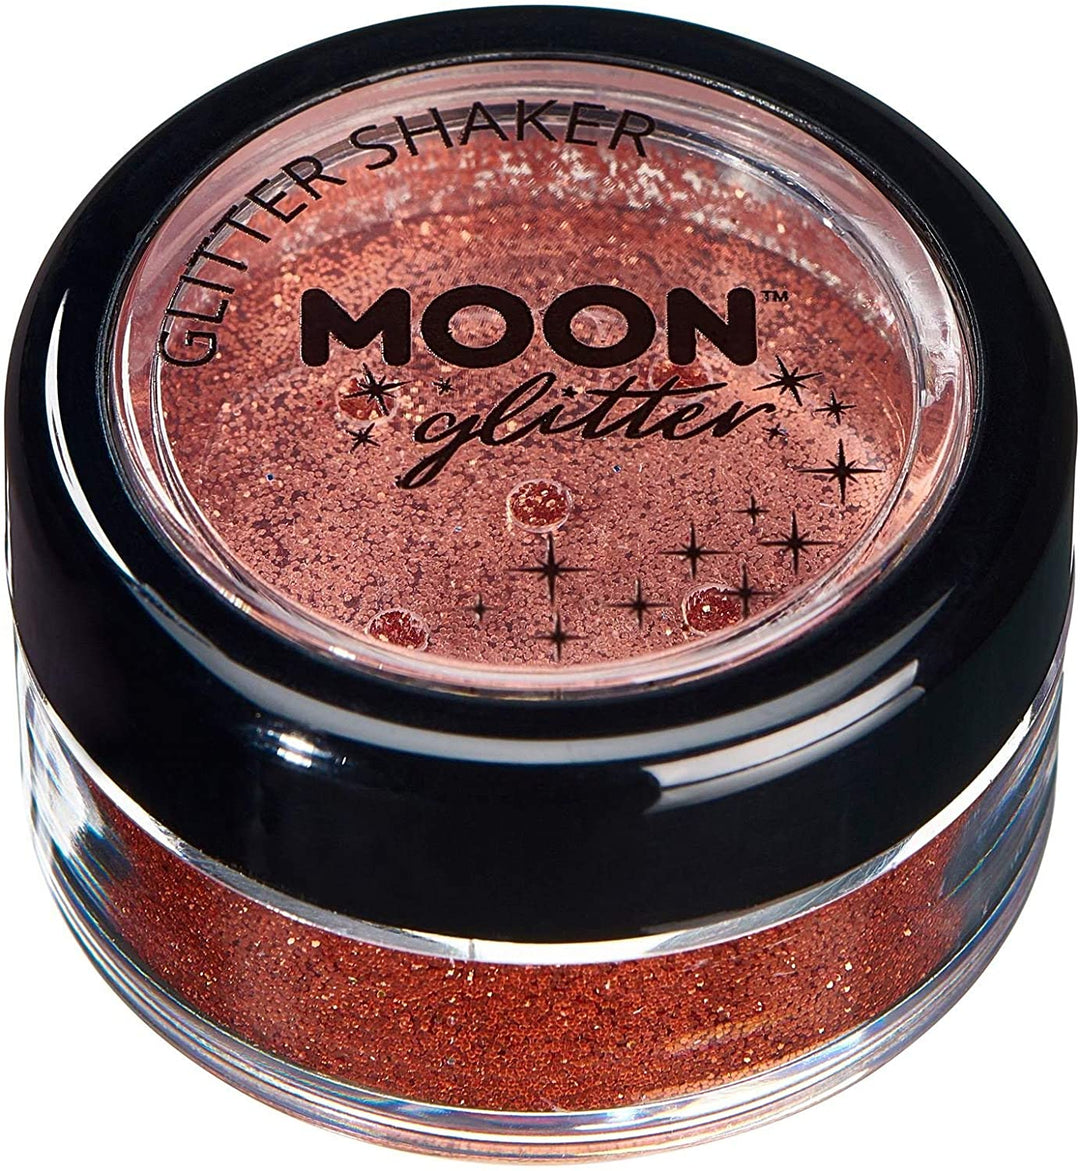 Classic Fine Glitter Shakers by Moon Glitter Copper Bronze - Cosmetic Festival Makeup Glitter for Face, Body, Nails, Hair, Lips - 5g